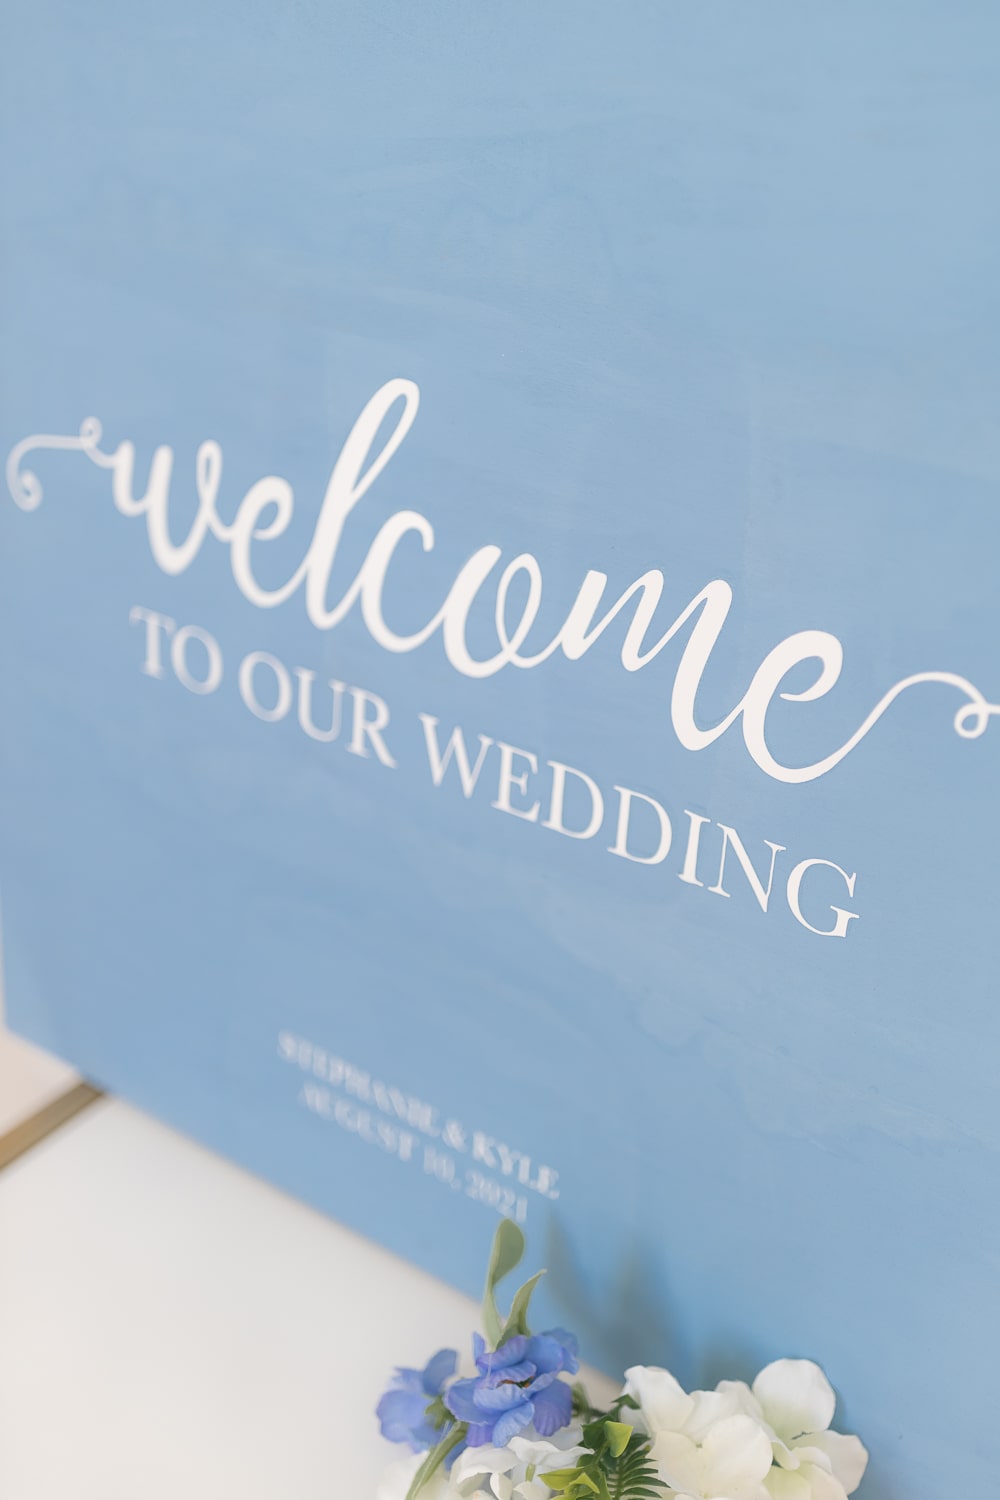 Cricut iron on instructions for making a DIY wedding welcome sign out of wood from DIY blogger Stephanie Ziajka on Diary of a Debutante